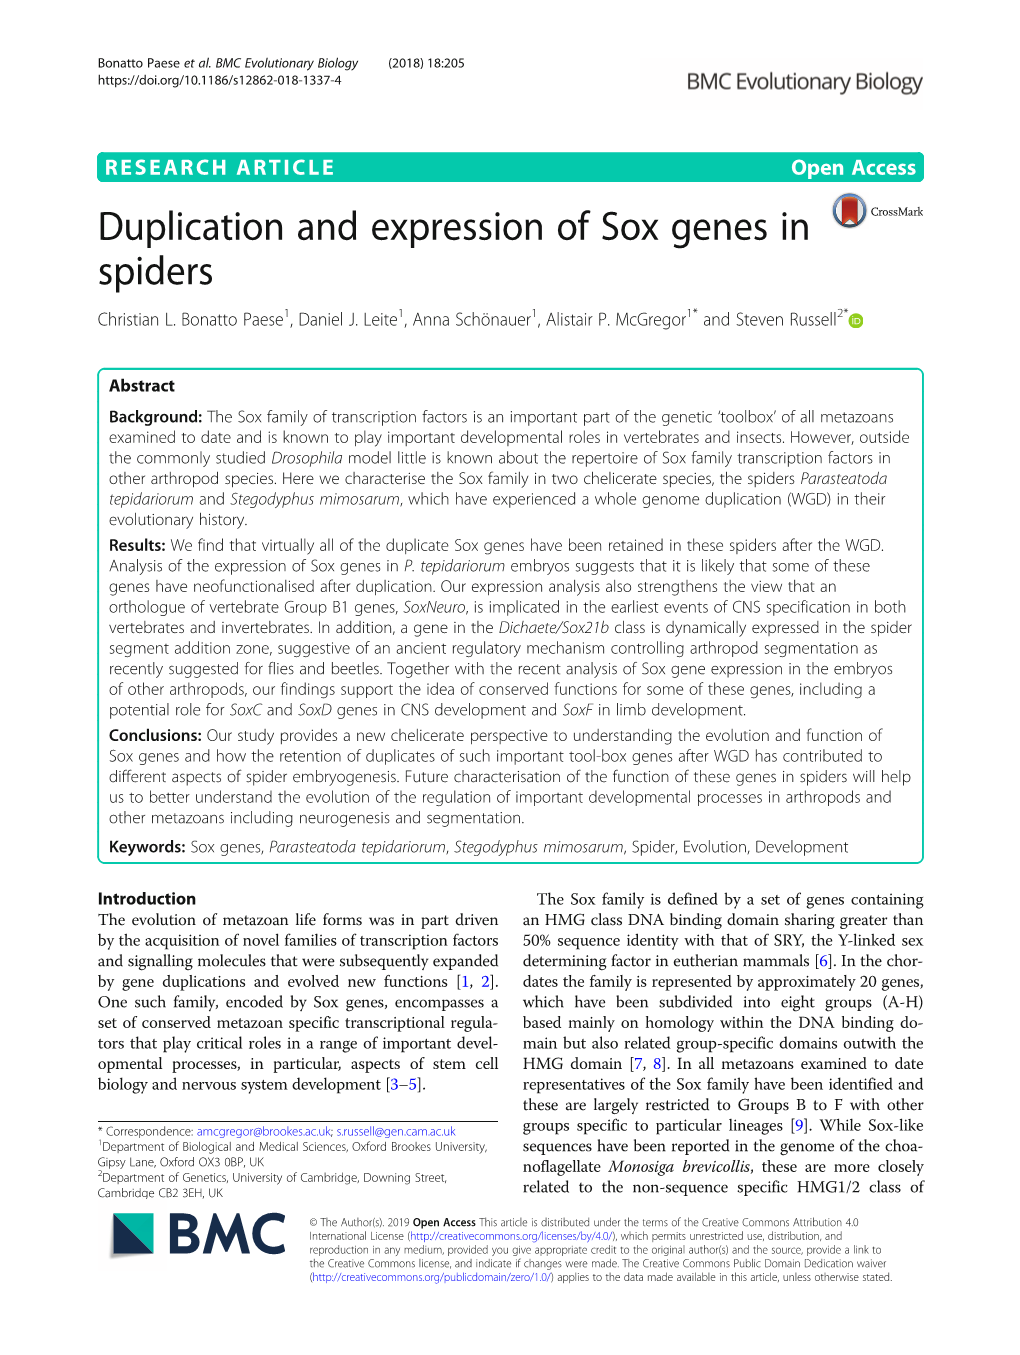 Duplication and Expression of Sox Genes in Spiders Christian L